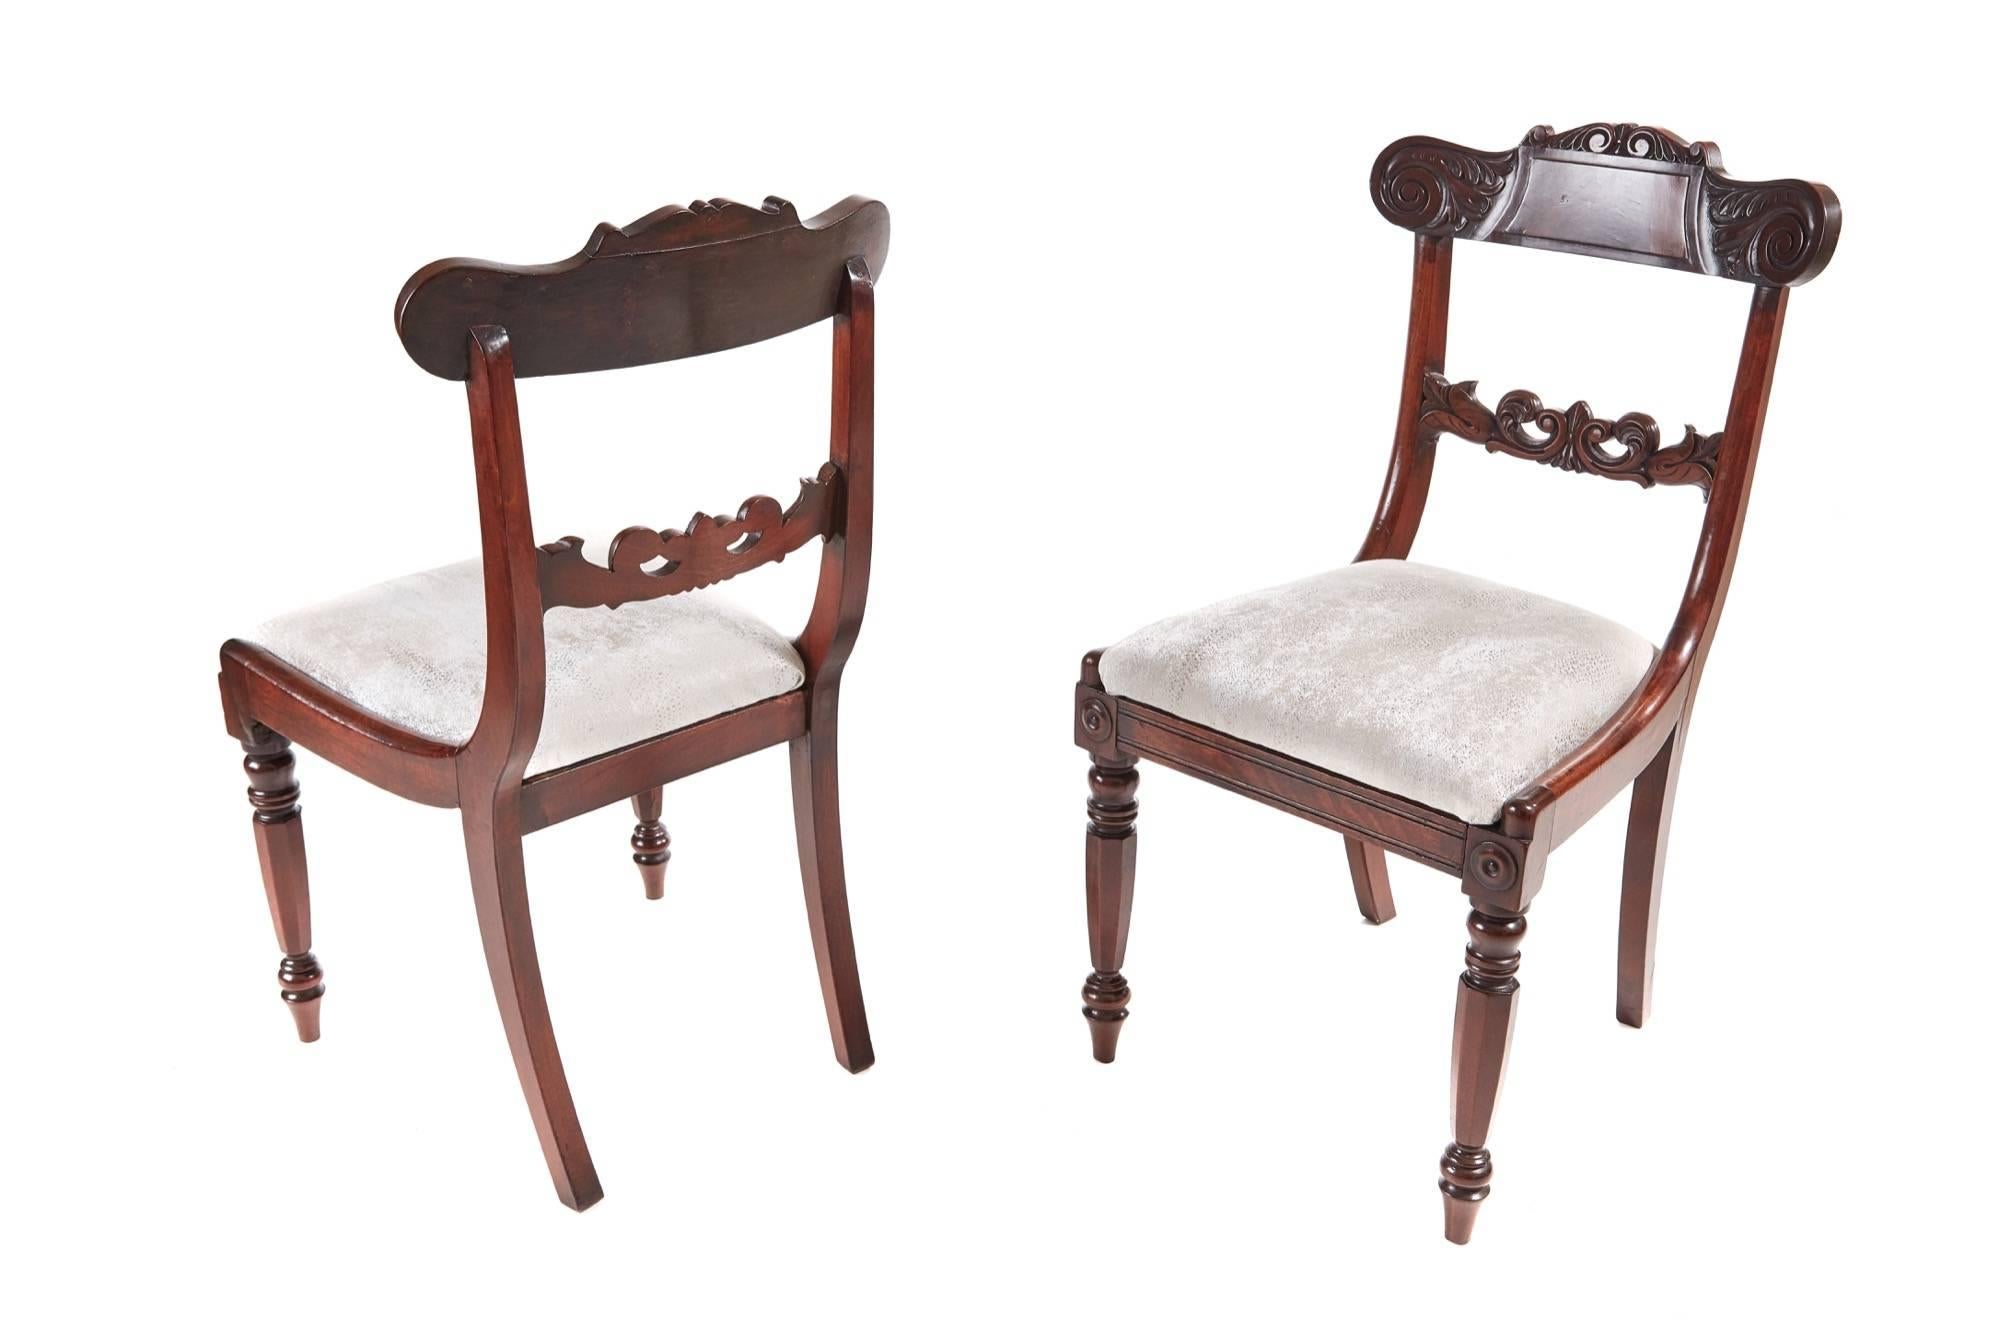 Pair of William IV mahogany side chairs, having ornate carved backs and centre rails, drop in seats newly recovered standing on shaped turned legs to the front outswept back legs
Lovely color and condition.